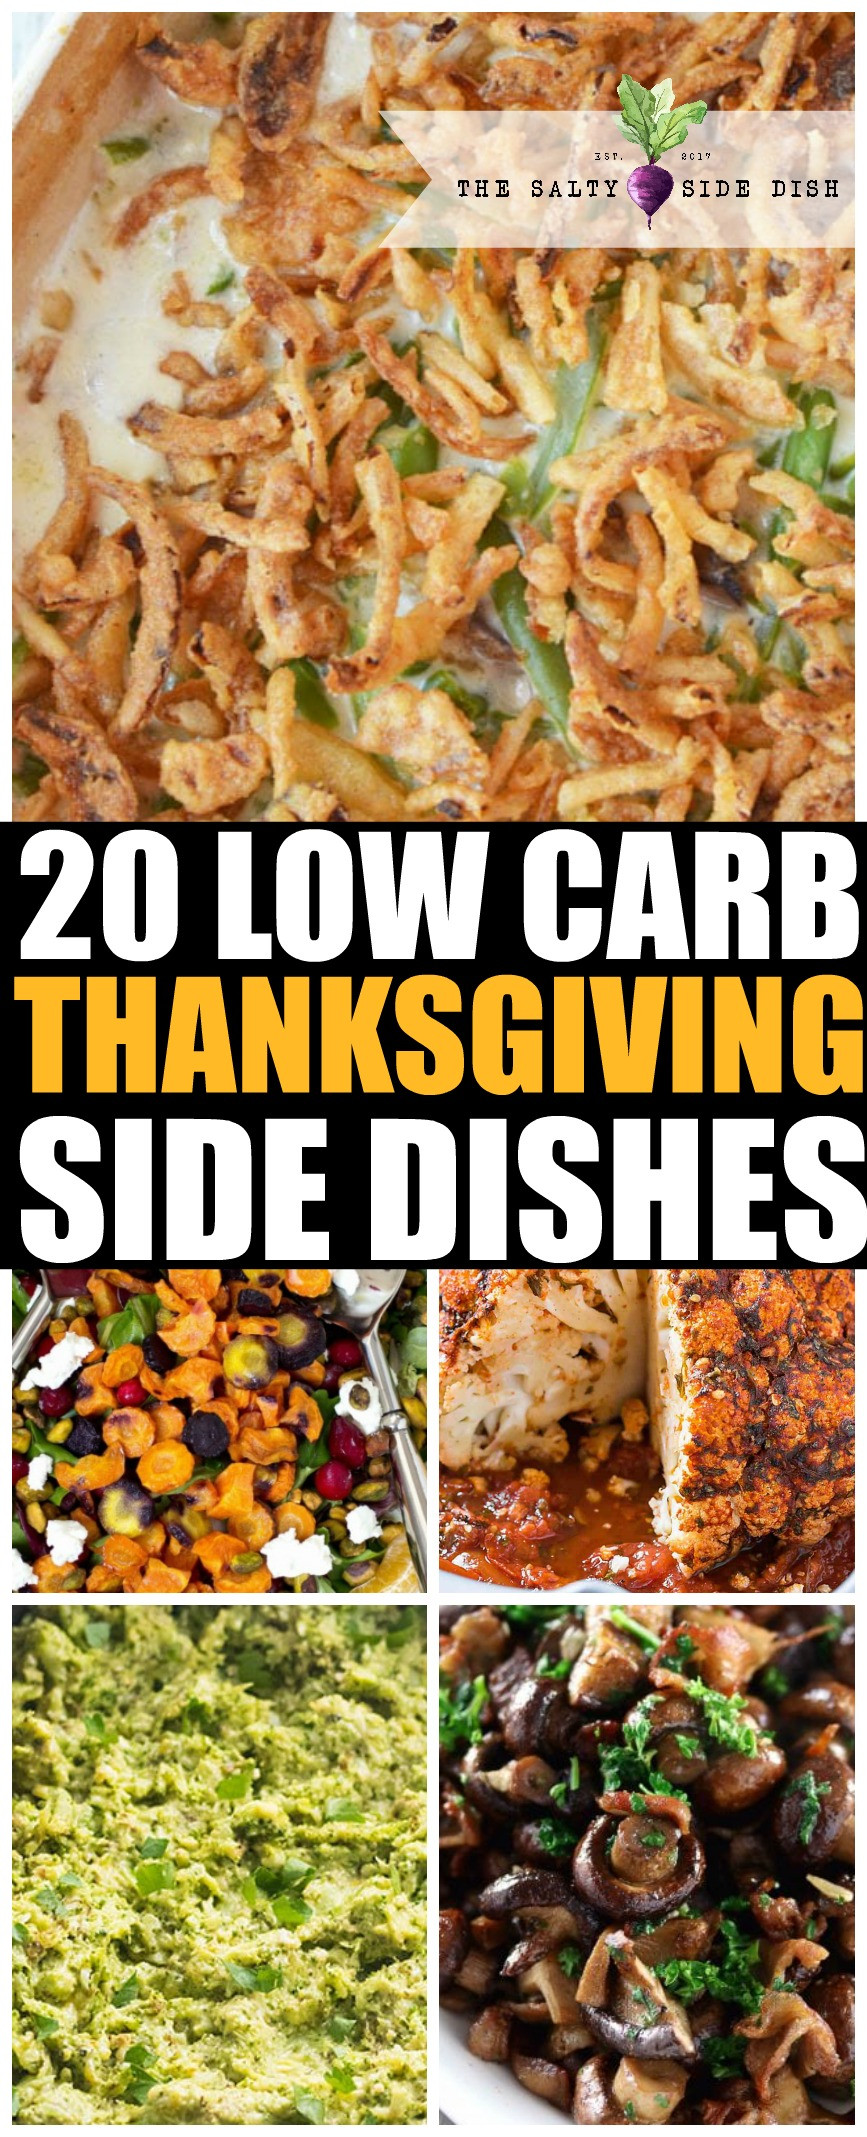 Low Carb Thanksgiving Side Dishes
 20 Low Carb Side Dishes for Thanksgiving